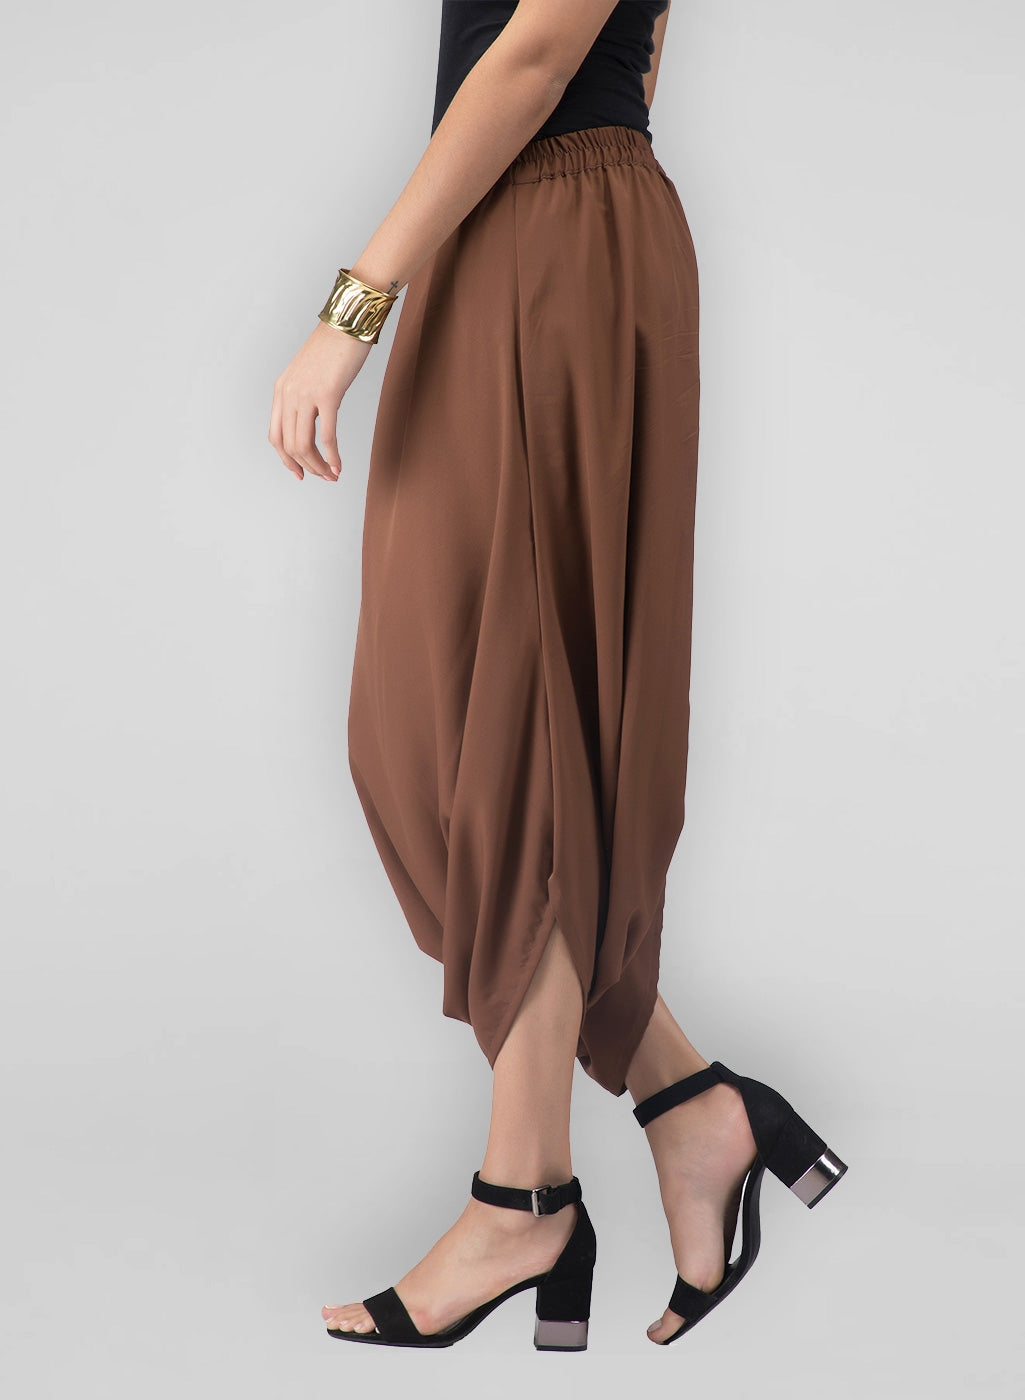 These brown cowl pants for women are headturners